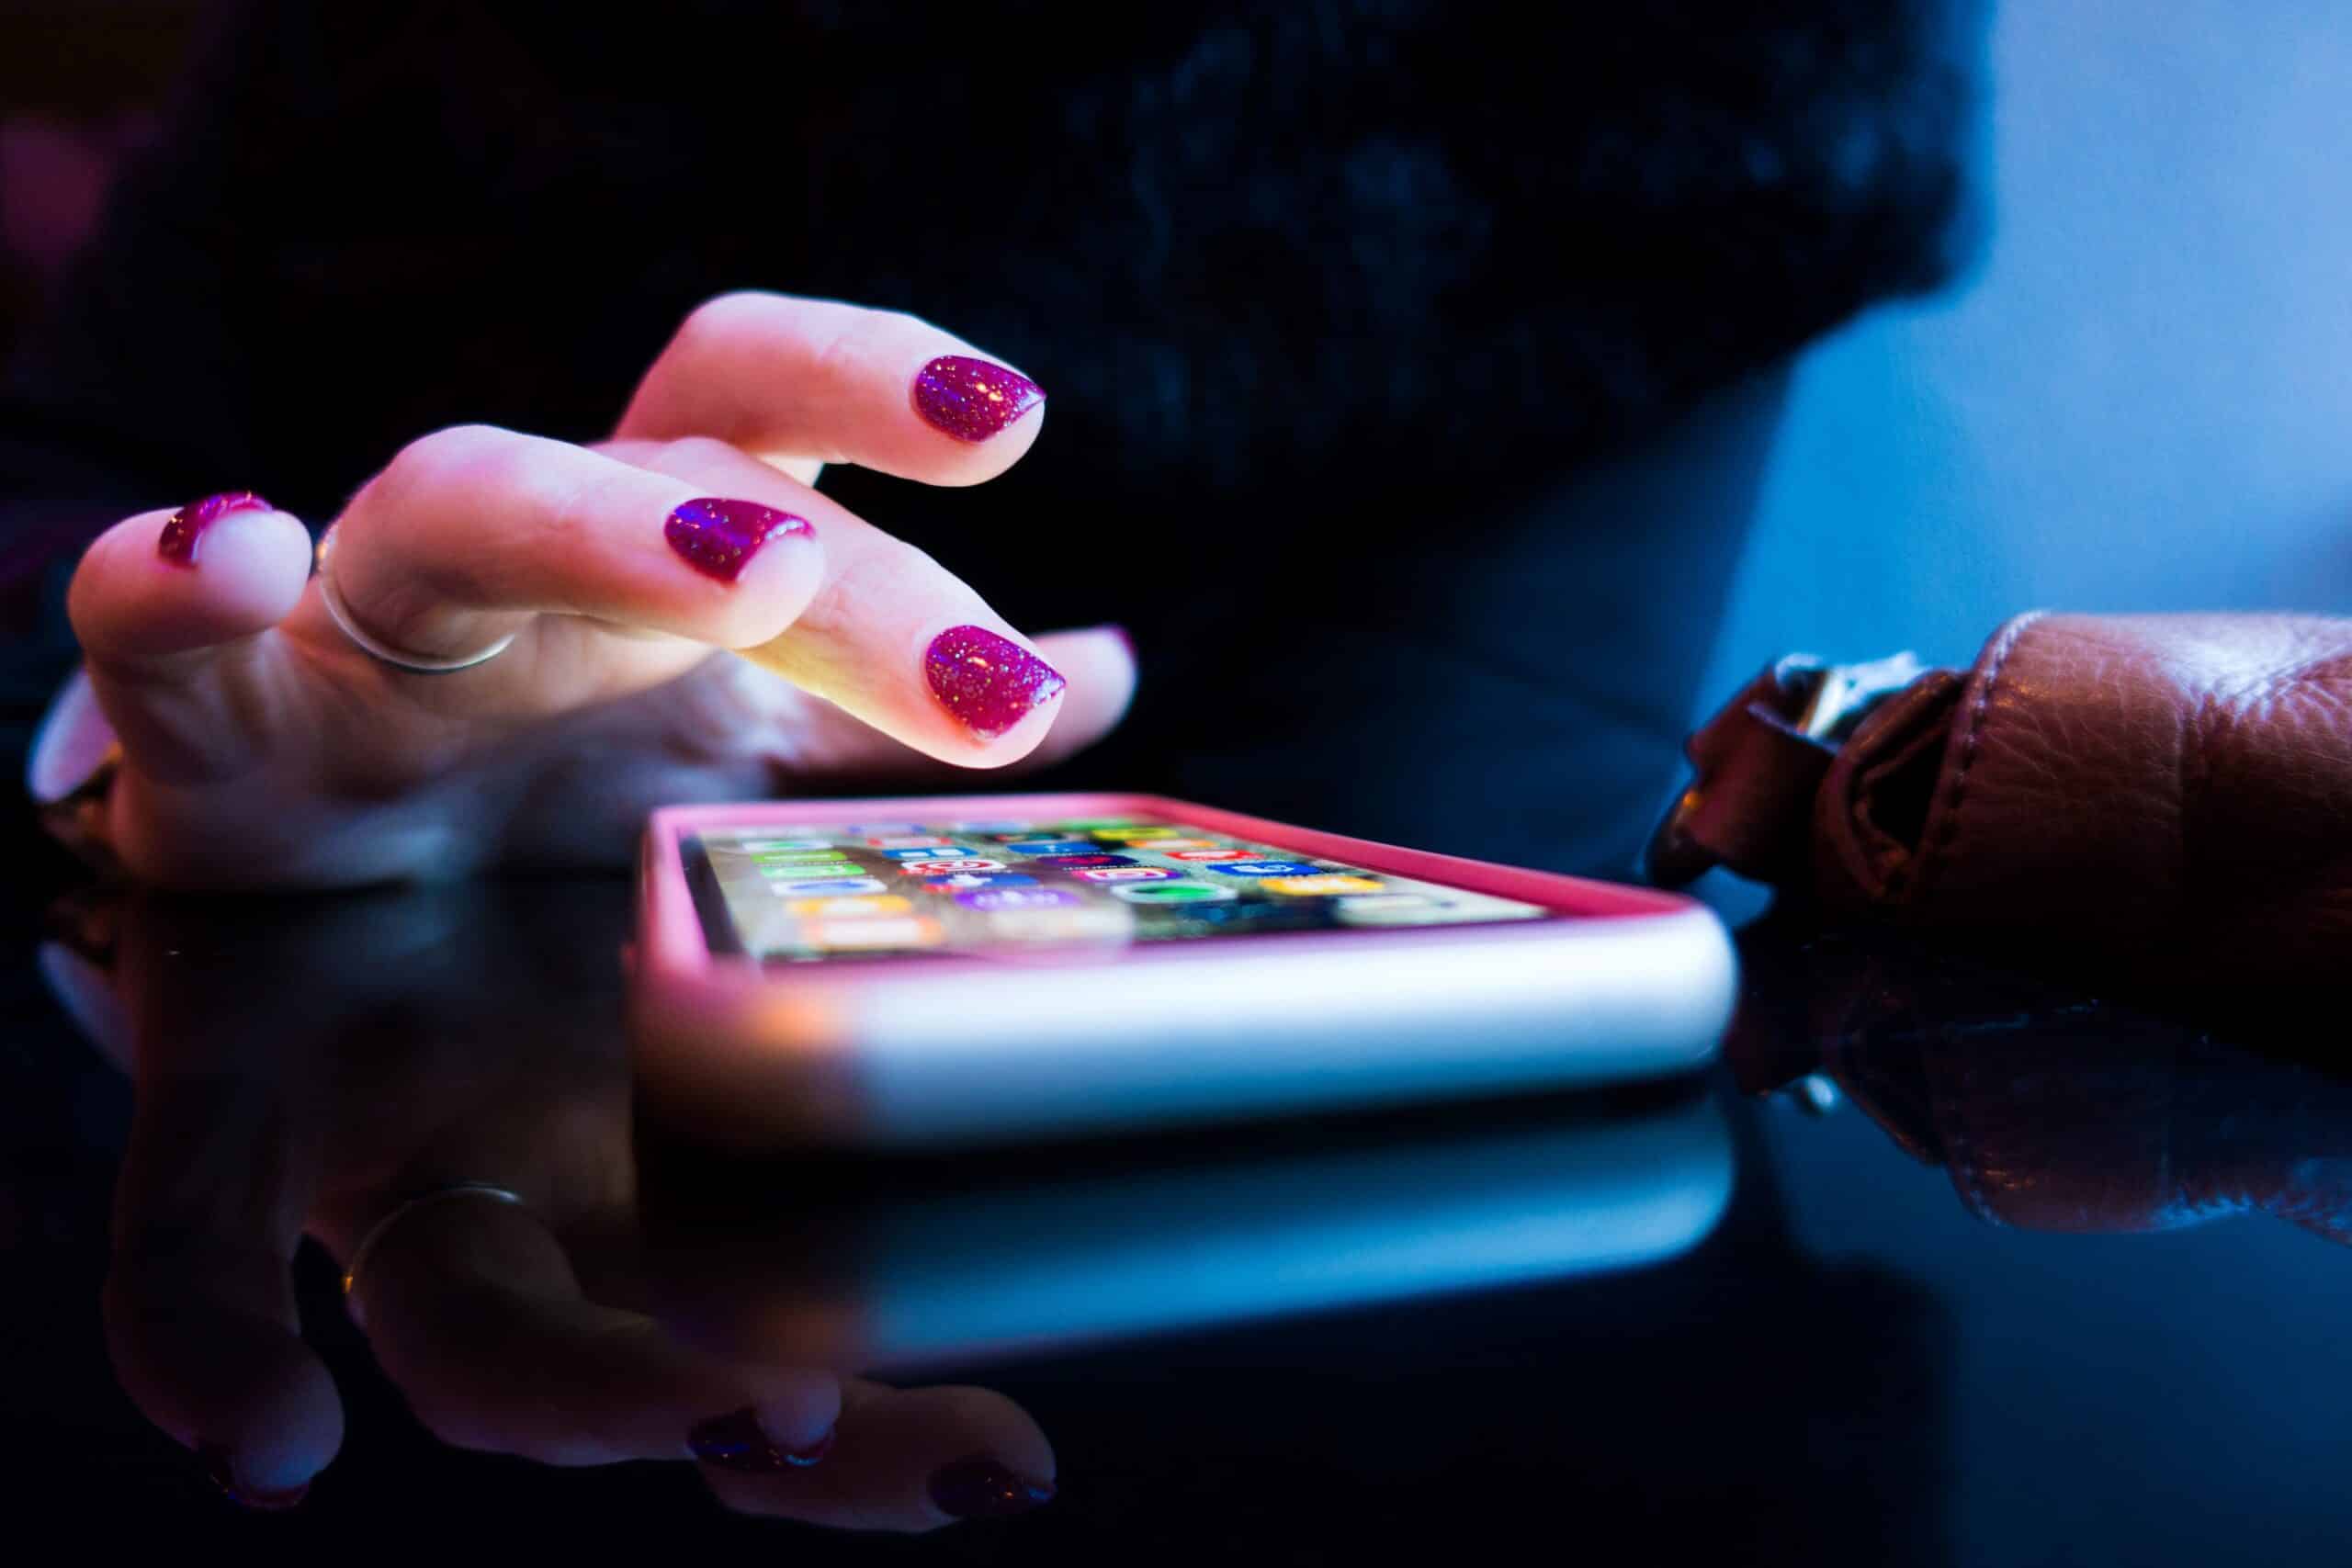 a woman's hand with pink nails touching a cell phone